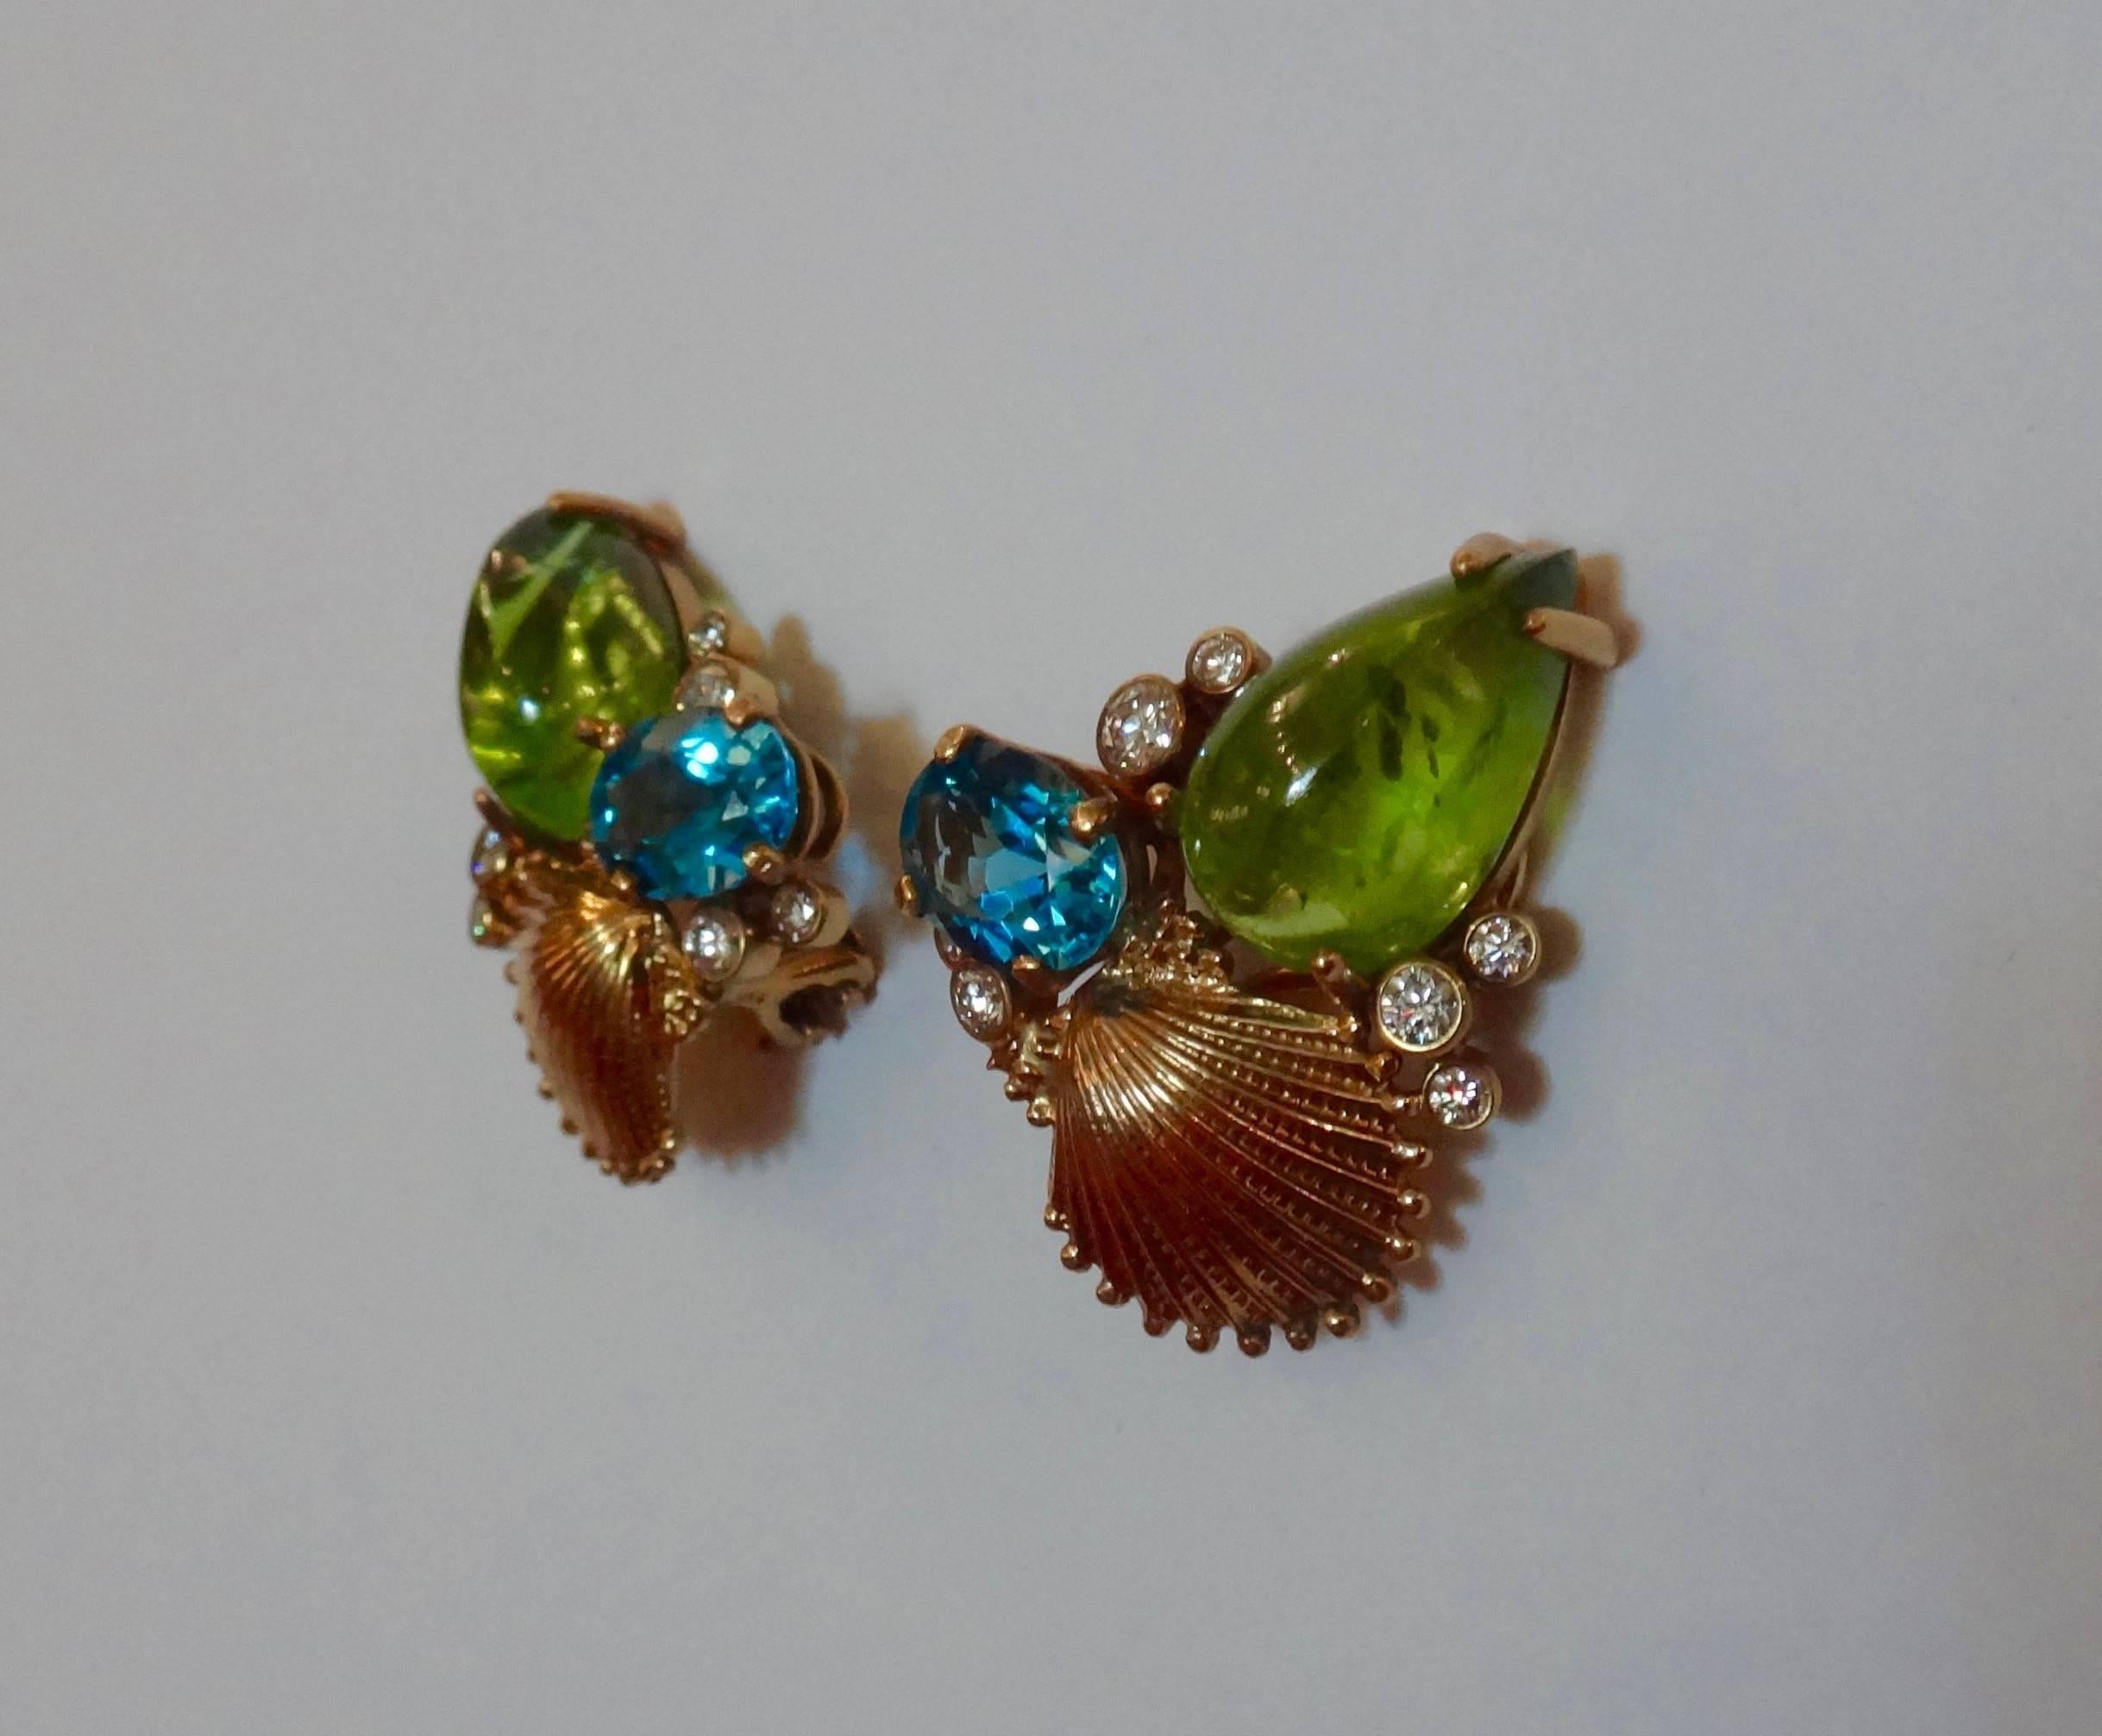 A fine and perfectly matched pair of cabochon peridots (2 at 16.37 carats), two faceted Swiss blue topaz (2 at 4.10 carats) and 14 bezel set diamonds at .77 carats are combined  with 18k yellow gold sculpted shells in these 